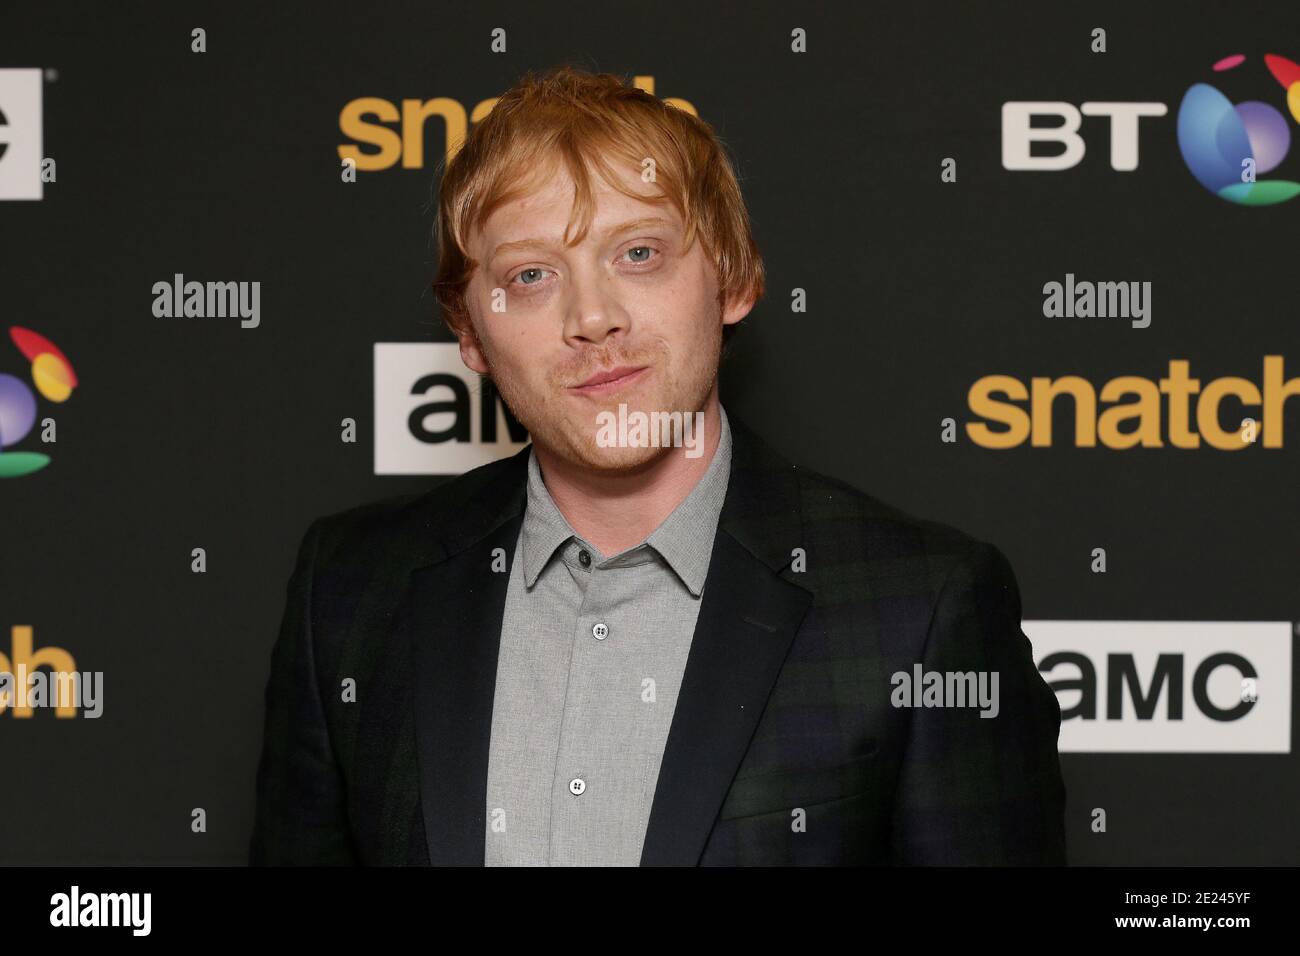 File photo dated 28/09/17 of Rupert Grint who has revealed he became a father during a break in filming caused by the coronavirus pandemic. The actor, best known for playing Ron Weasley in the Harry Potter films, and his partner Georgia Groome welcomed daughter Wednesday in May last year. Stock Photo